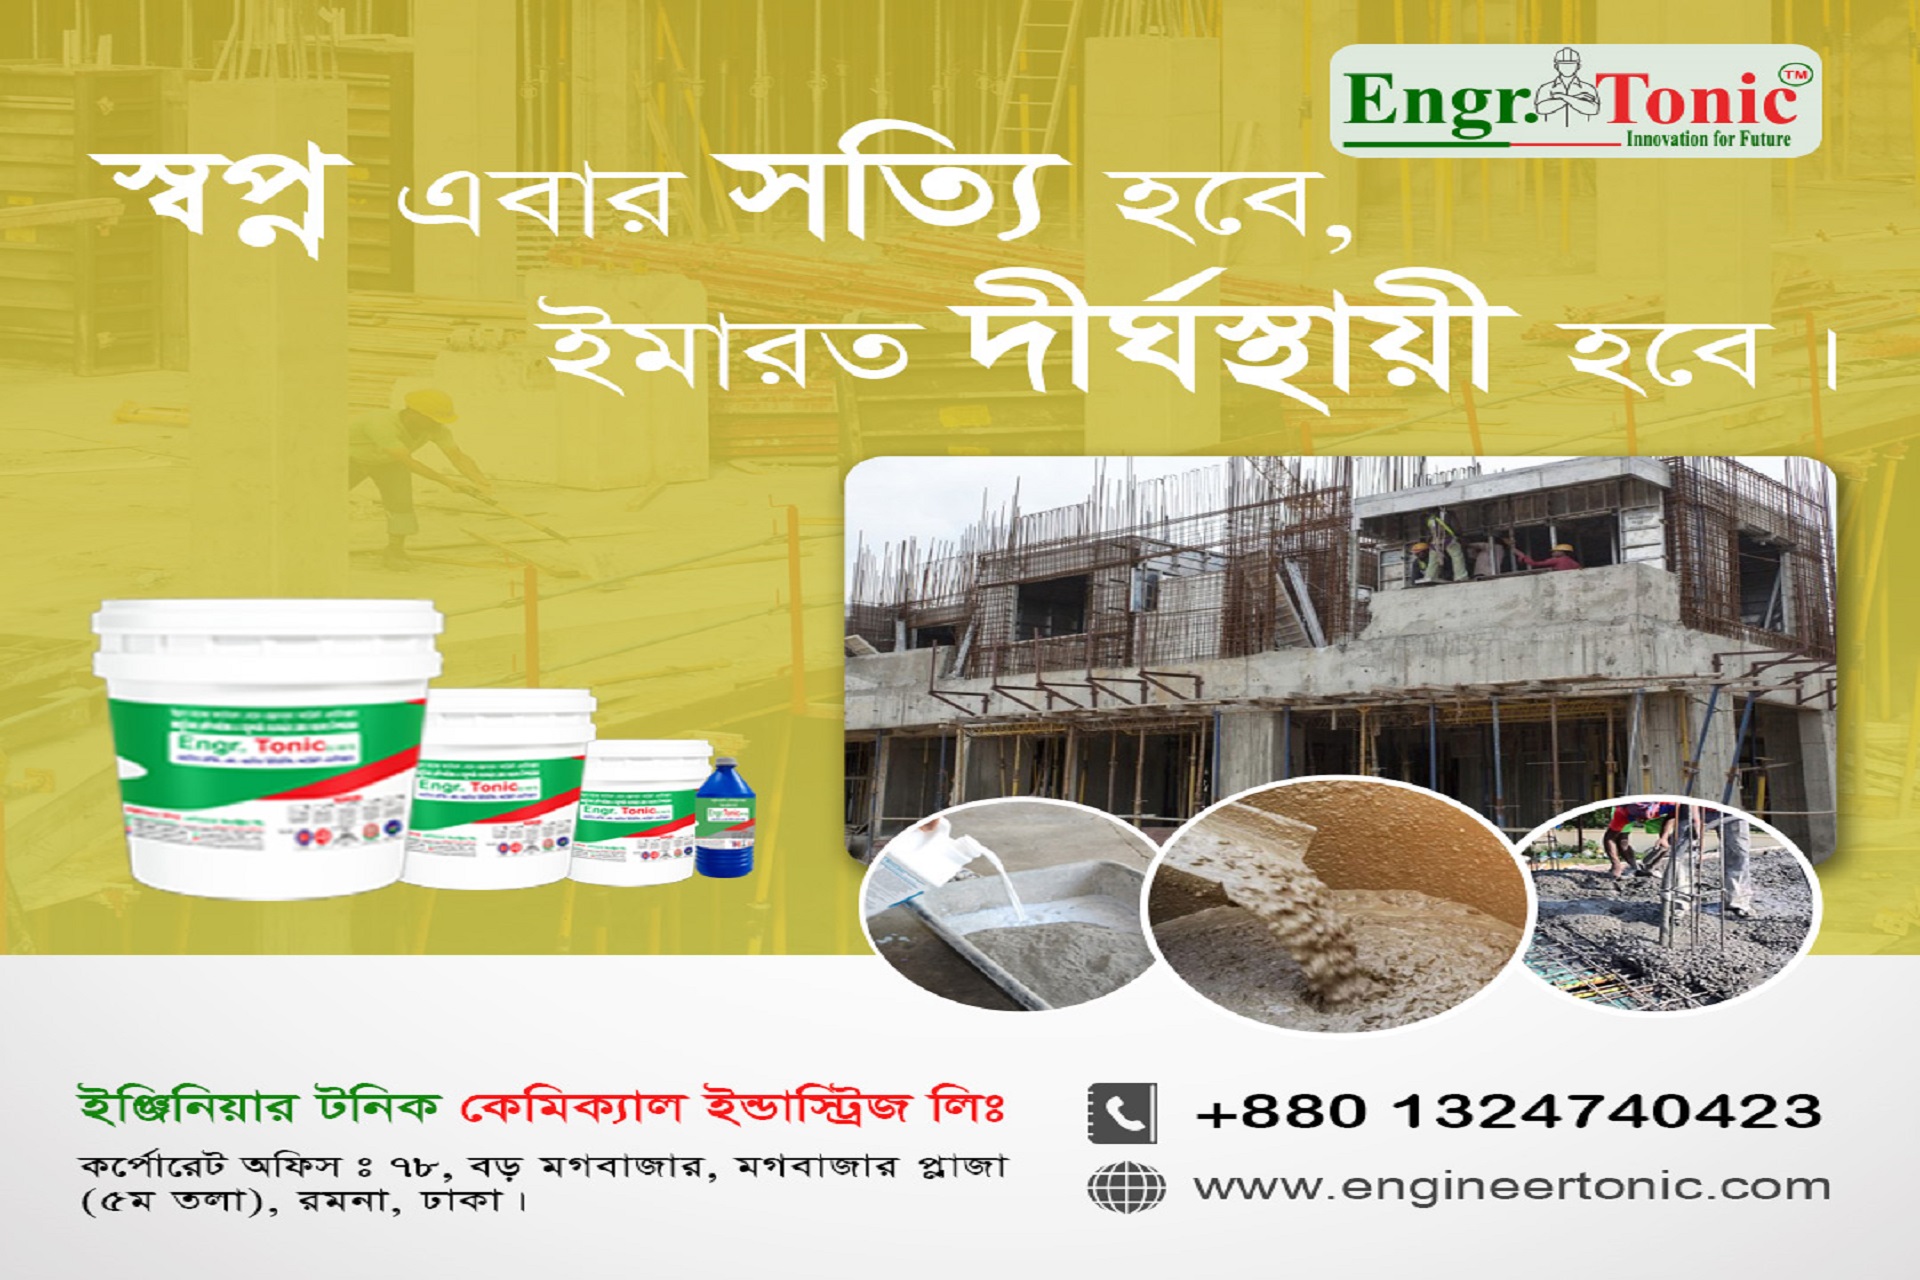 Presenting the Engr. Tonic Concrete Admixture: A Revolutionary Product in Building Construction in Bangladesh